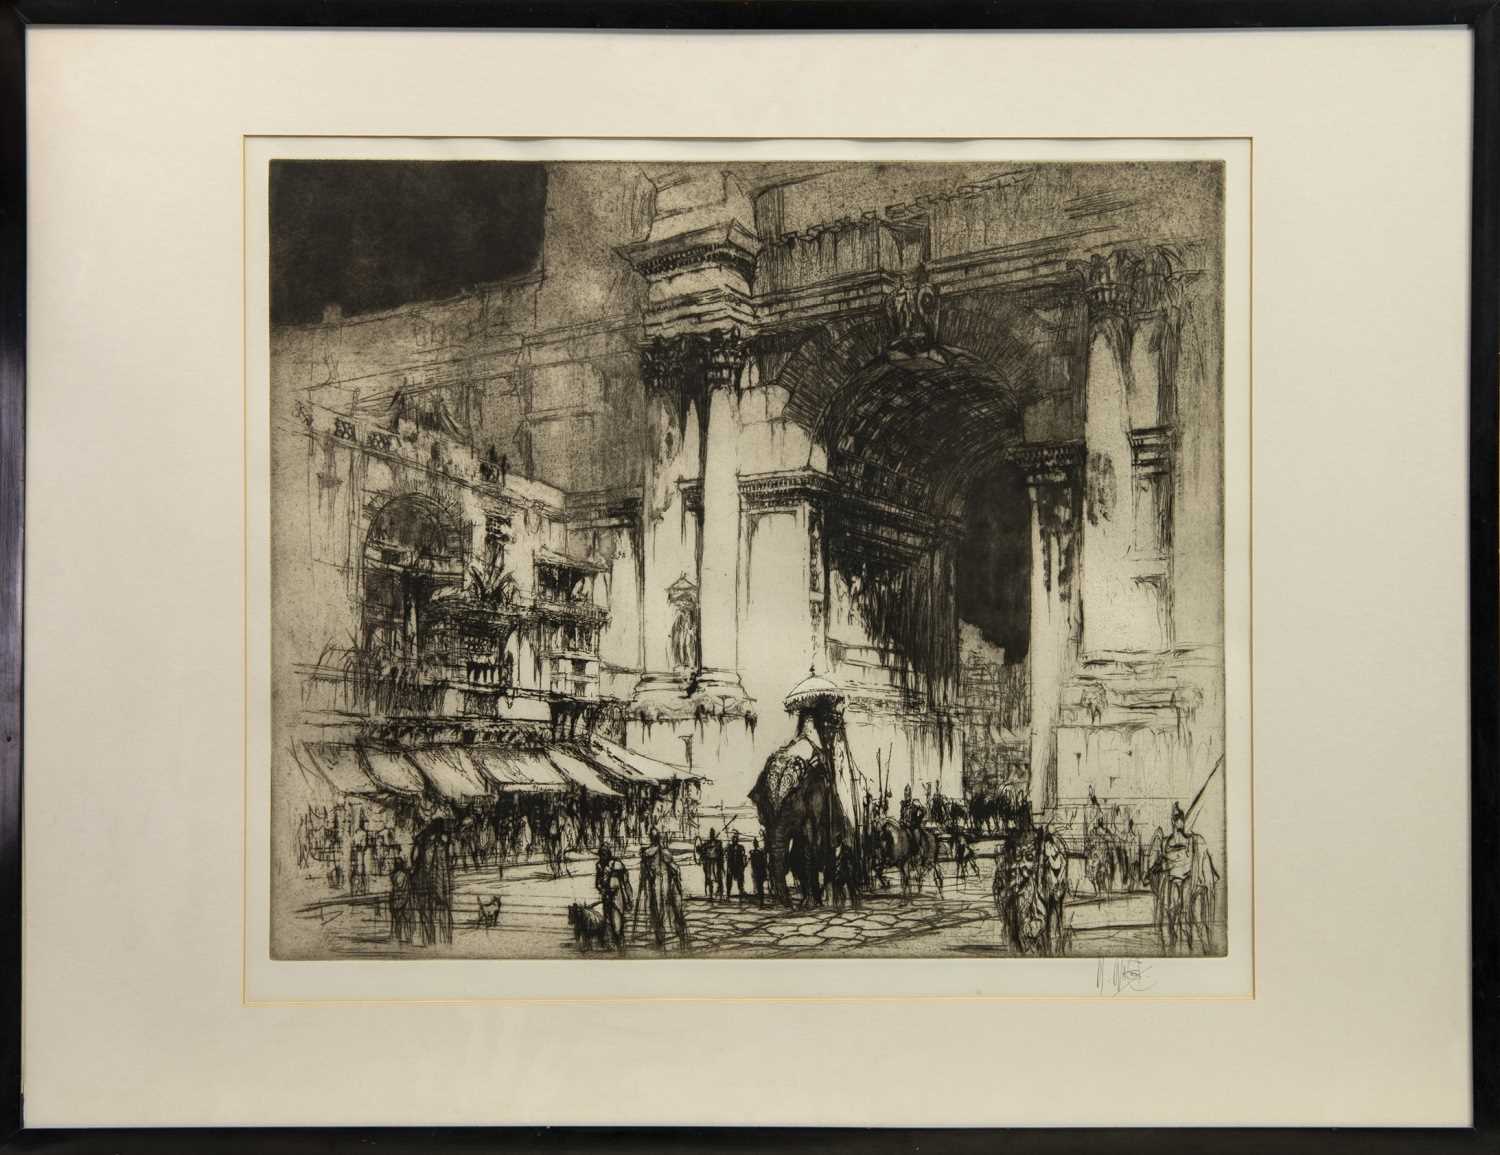 Lot 172 - ENTRY OF THE CONSUL, AN ETCHING BY WILLIAM WALCOT